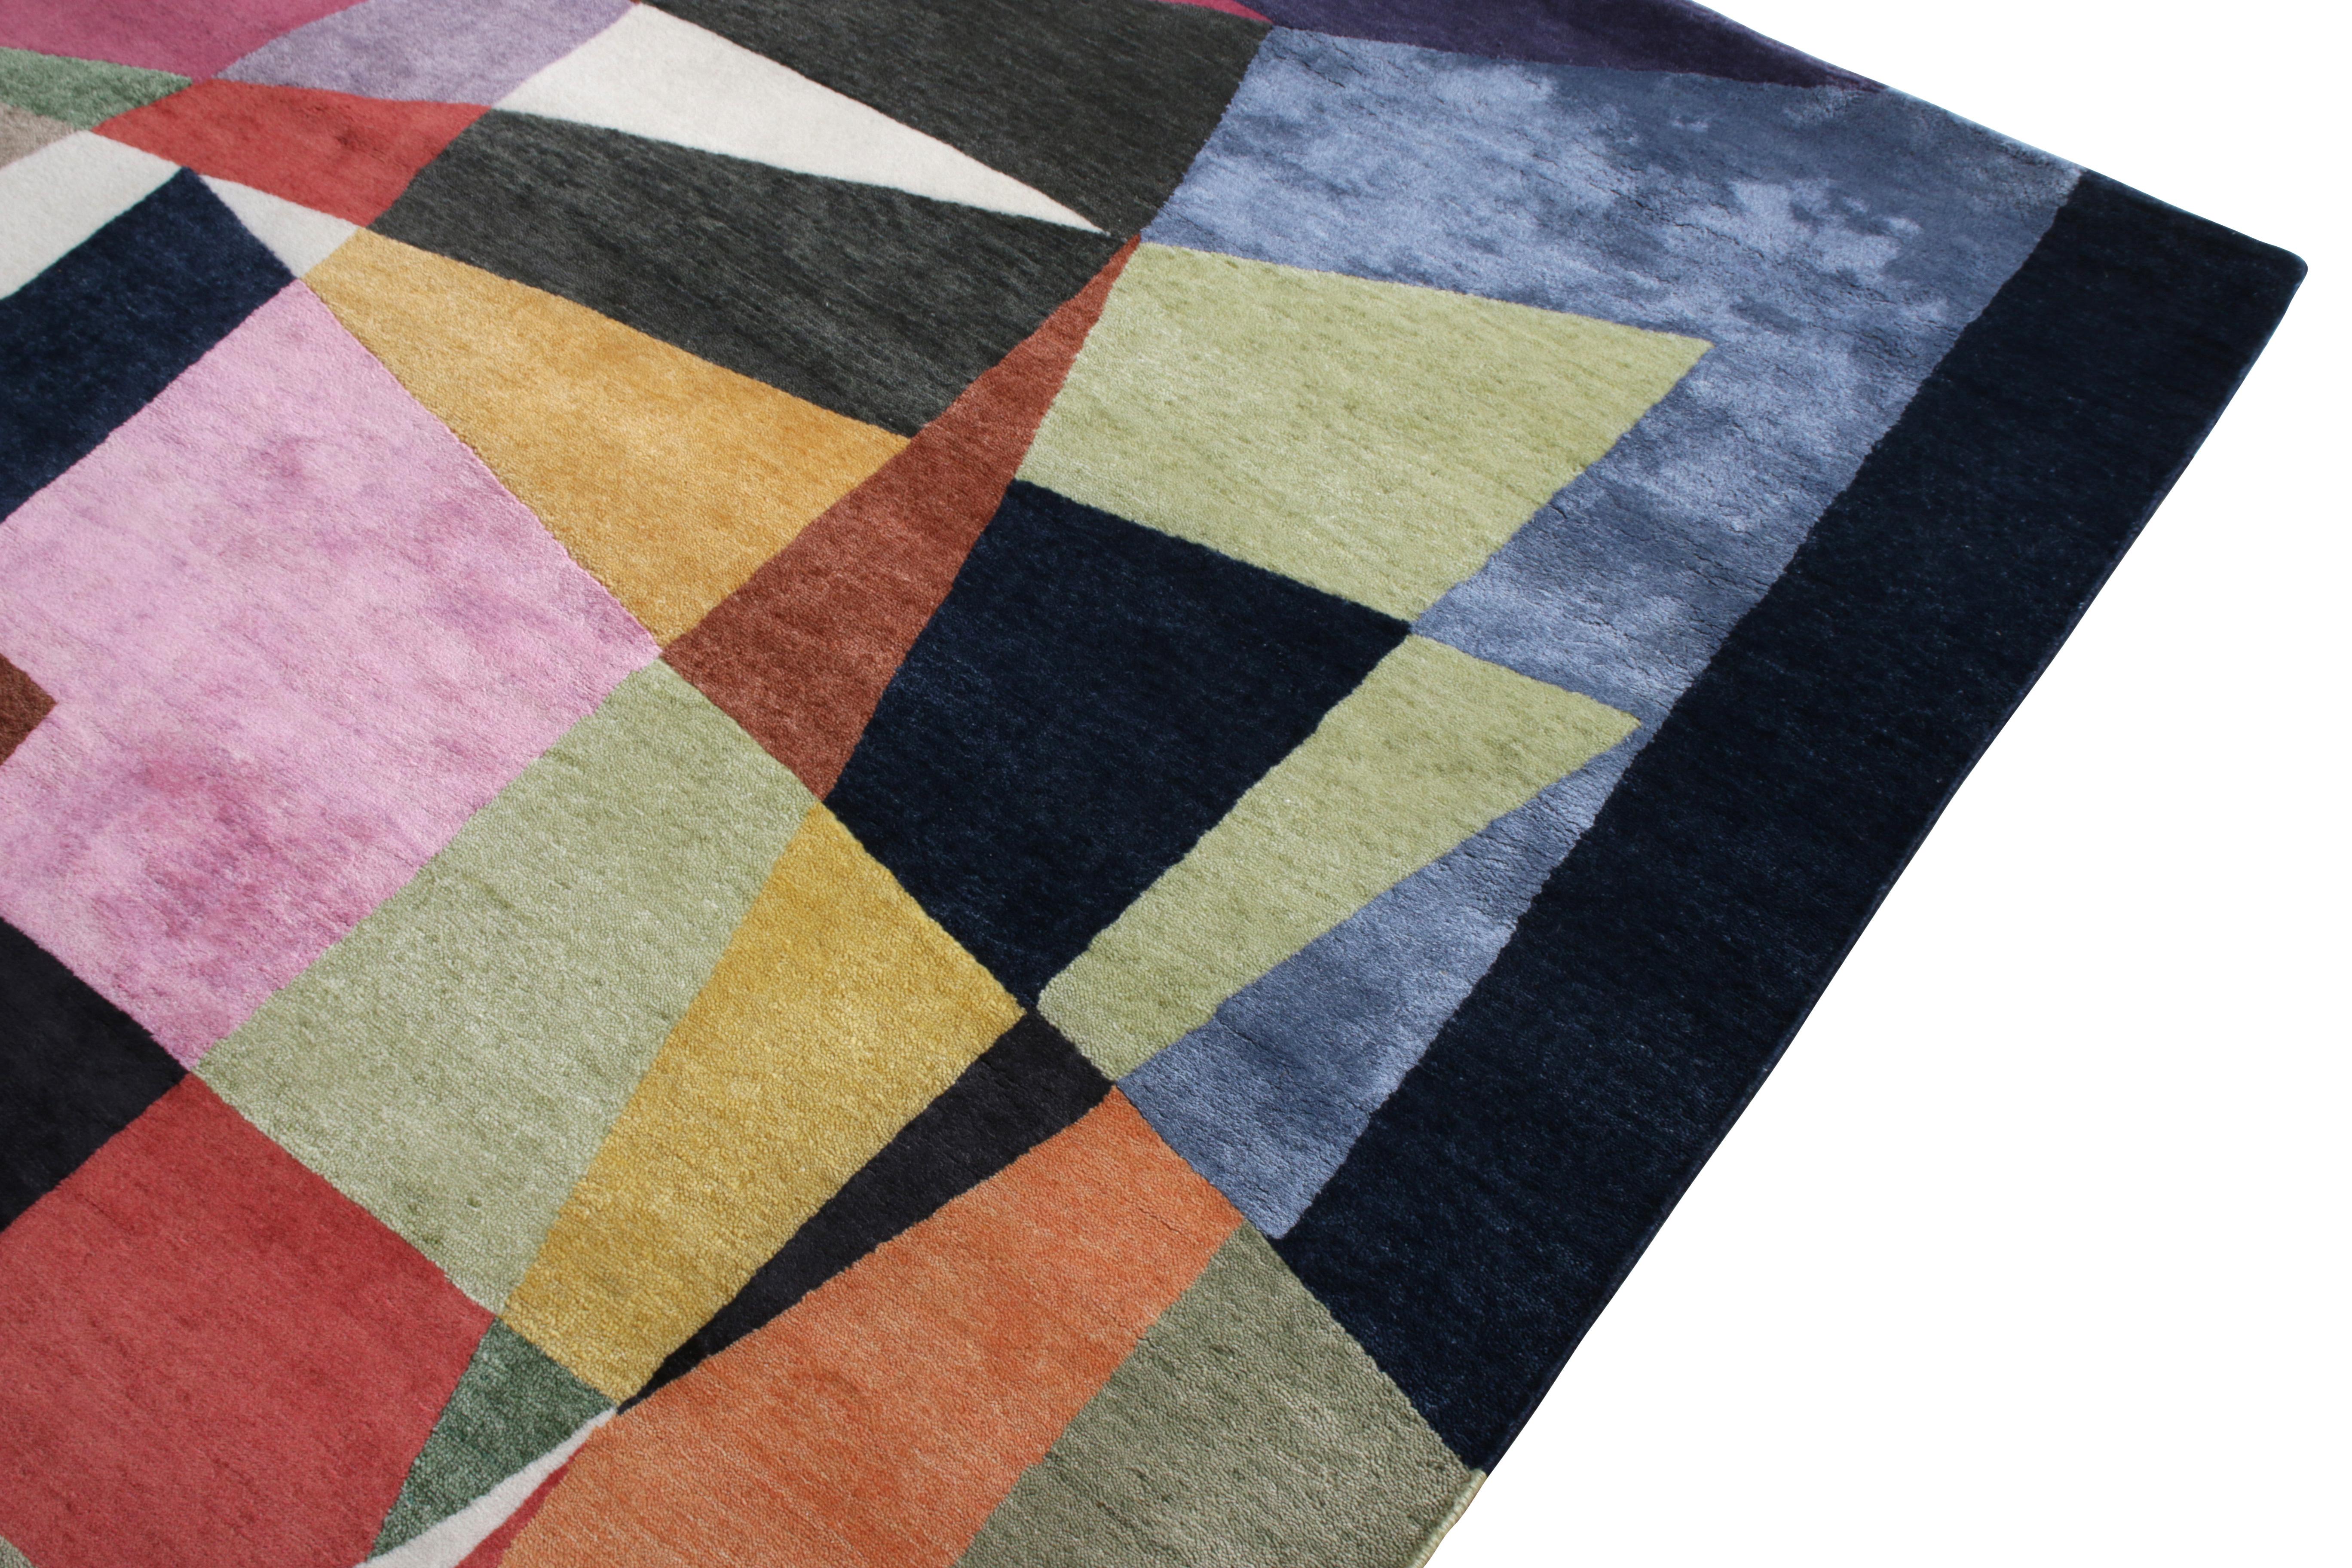 Indian Rug & Kilim's Mid-Century Modern Style Rug in Multi-Color Geometric Pattern